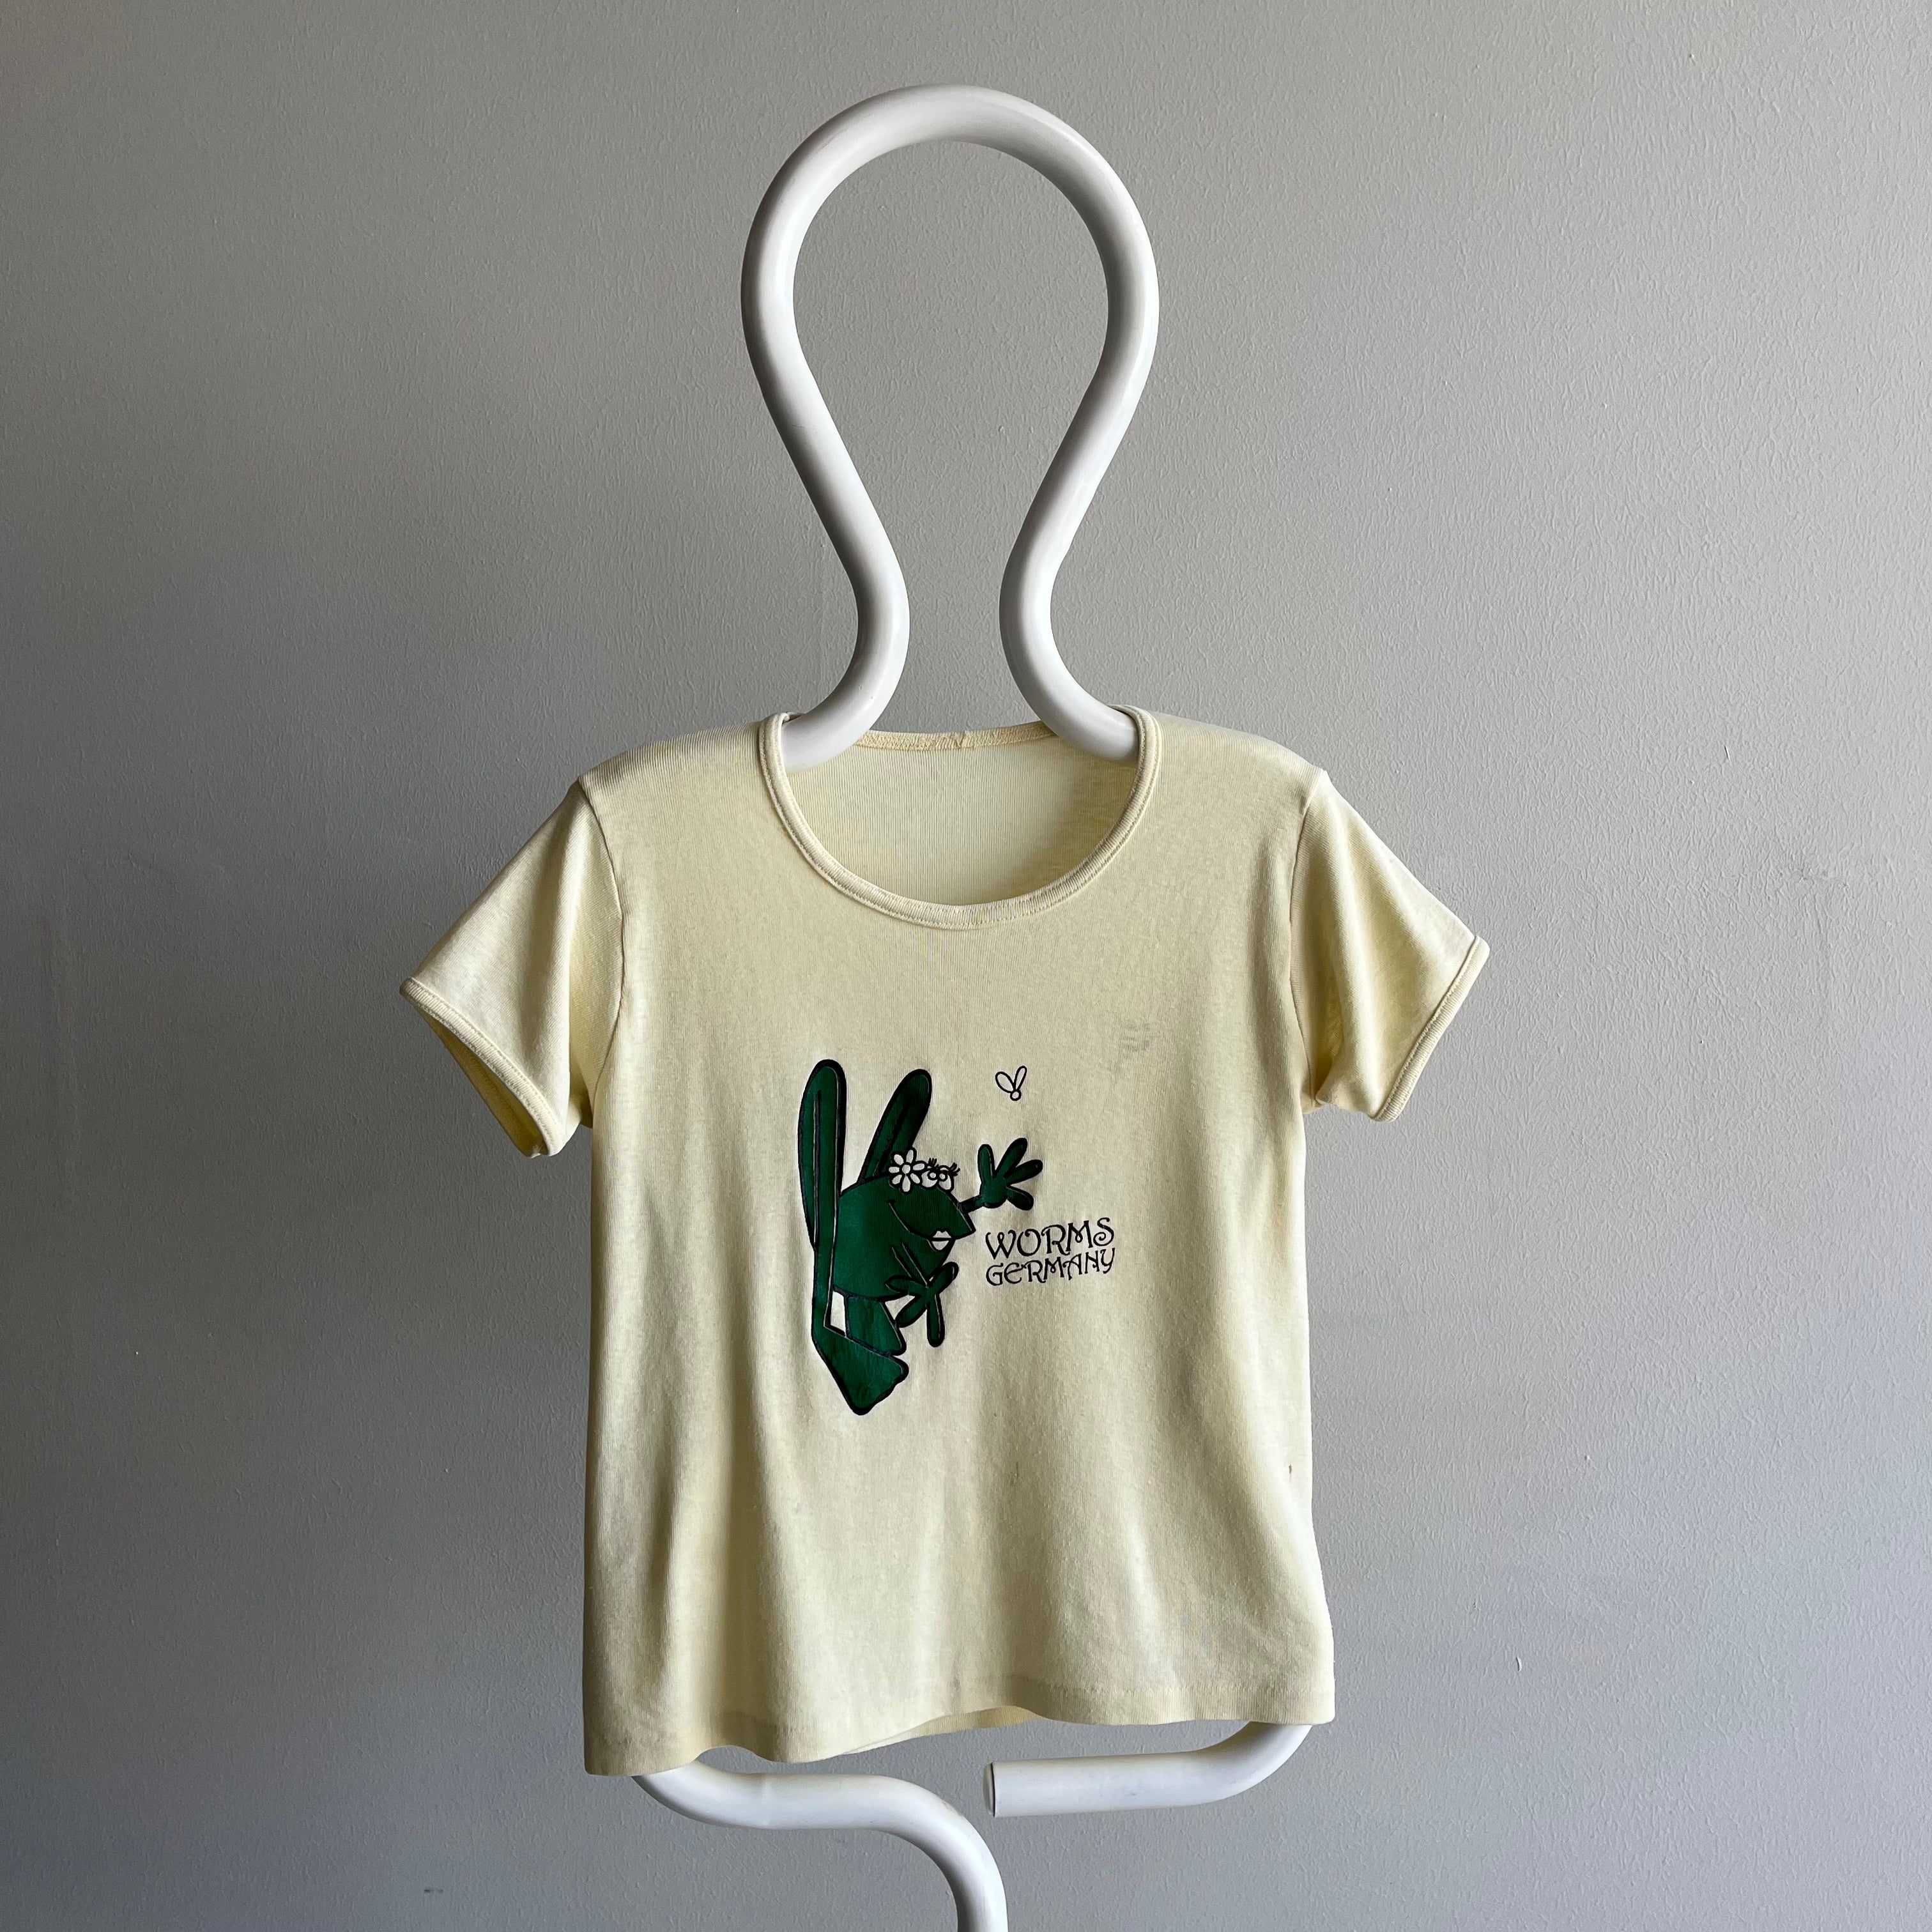 1970s Worms, Germany Baby T-Shirt